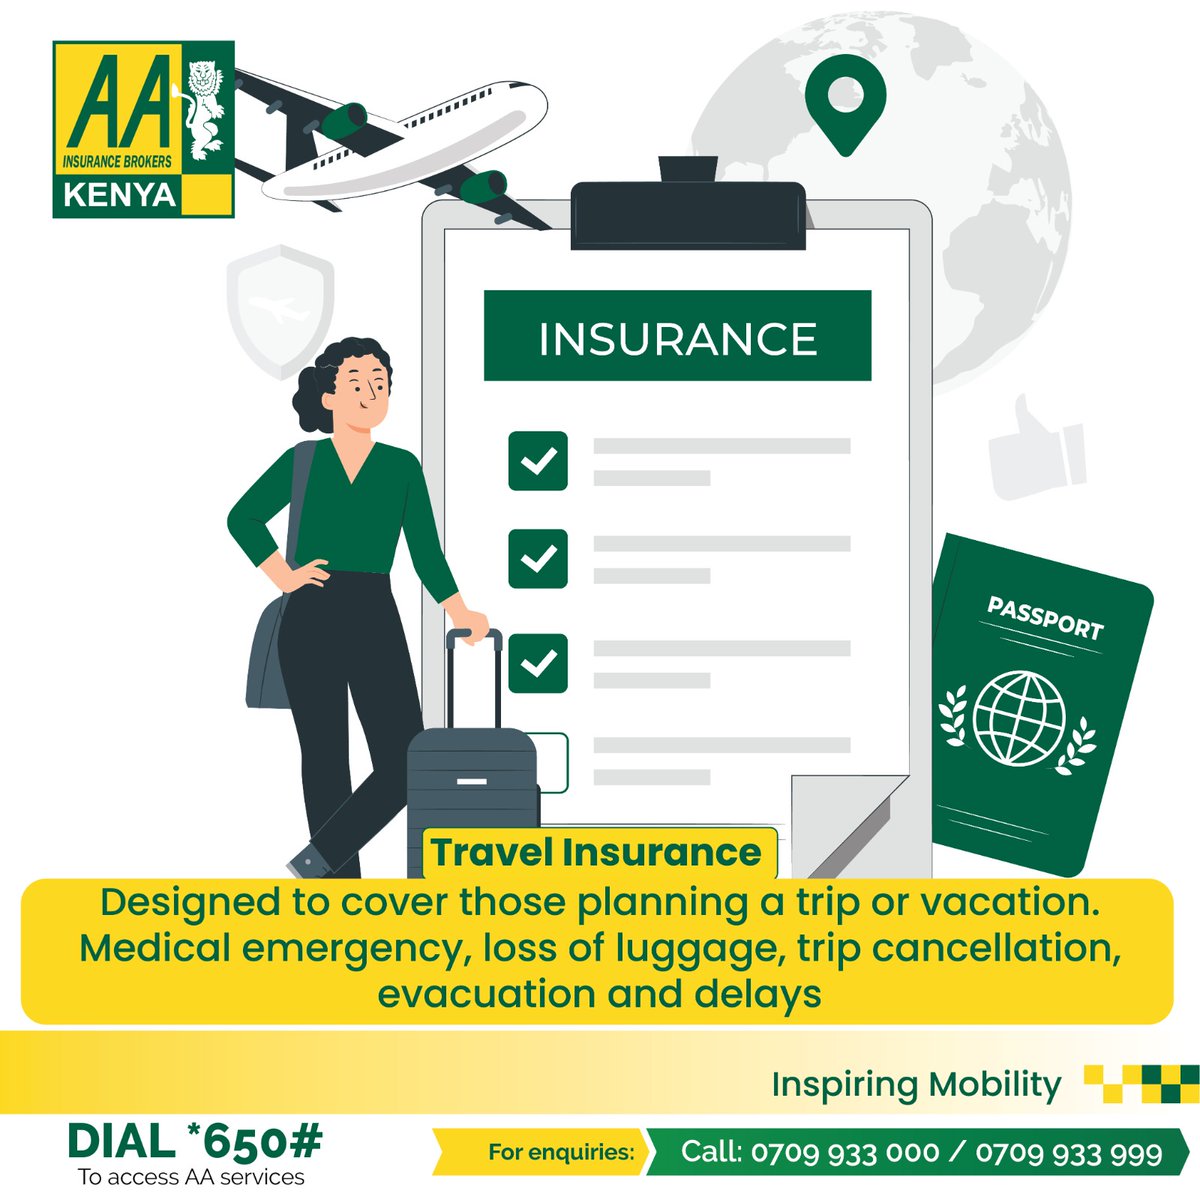 AA Insurance Brokers Travel Insurance cover is your passport to a worry-free journey. Whether it's medical emergencies, lost luggage, trip cancellations, evacuations, or delays we have got the protection you need. Request a free quote by calling us on 0720940636
#AAIBCares